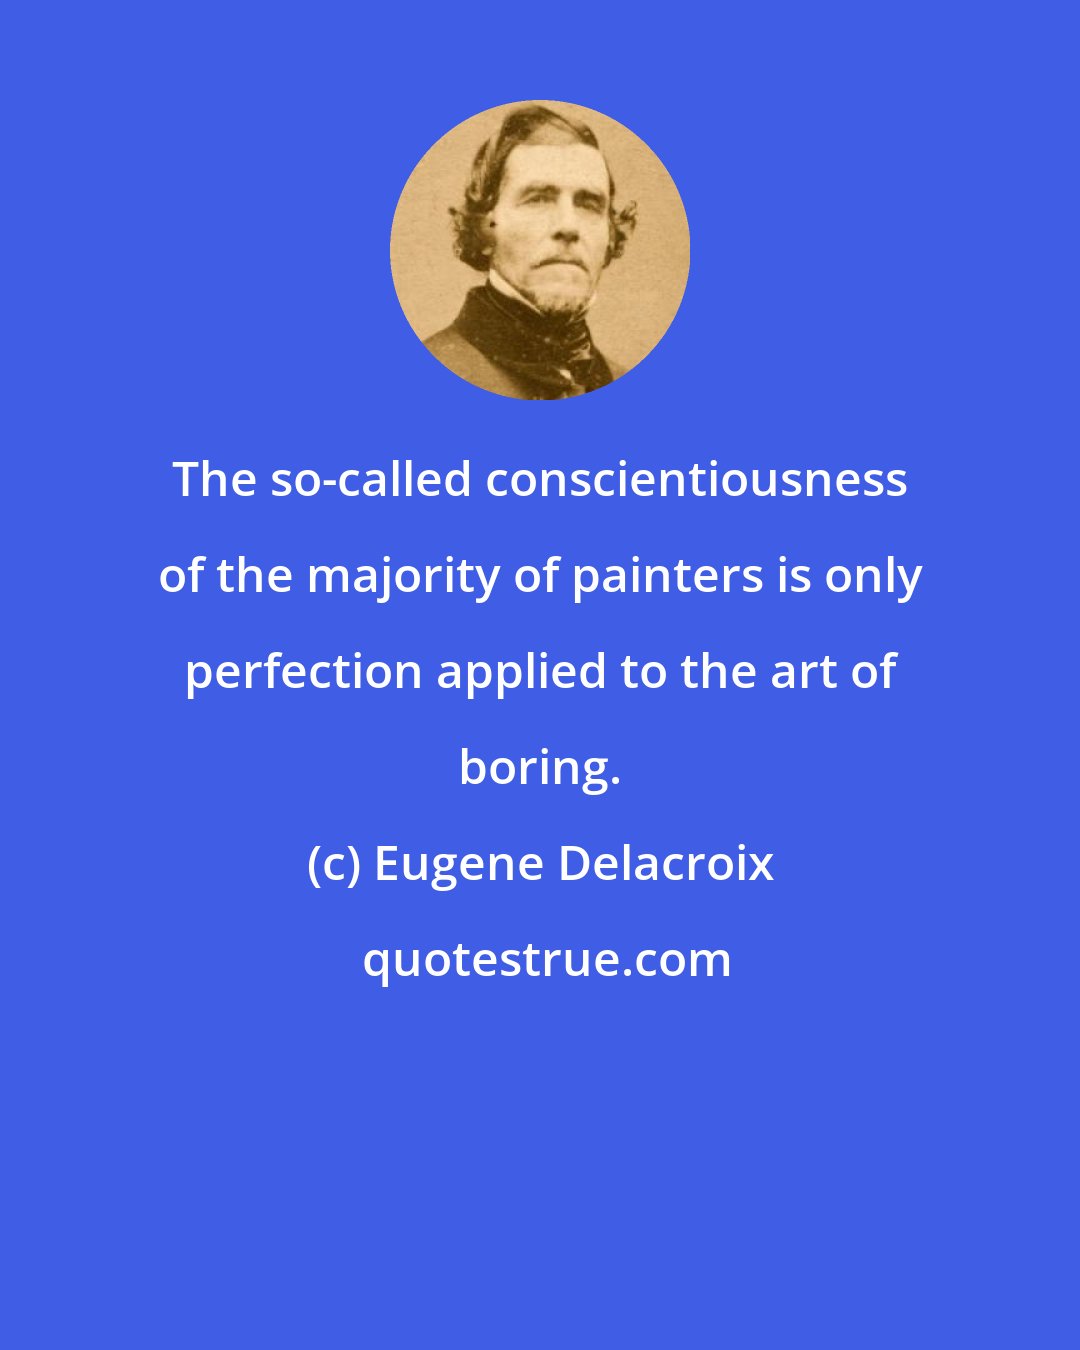 Eugene Delacroix: The so-called conscientiousness of the majority of painters is only perfection applied to the art of boring.